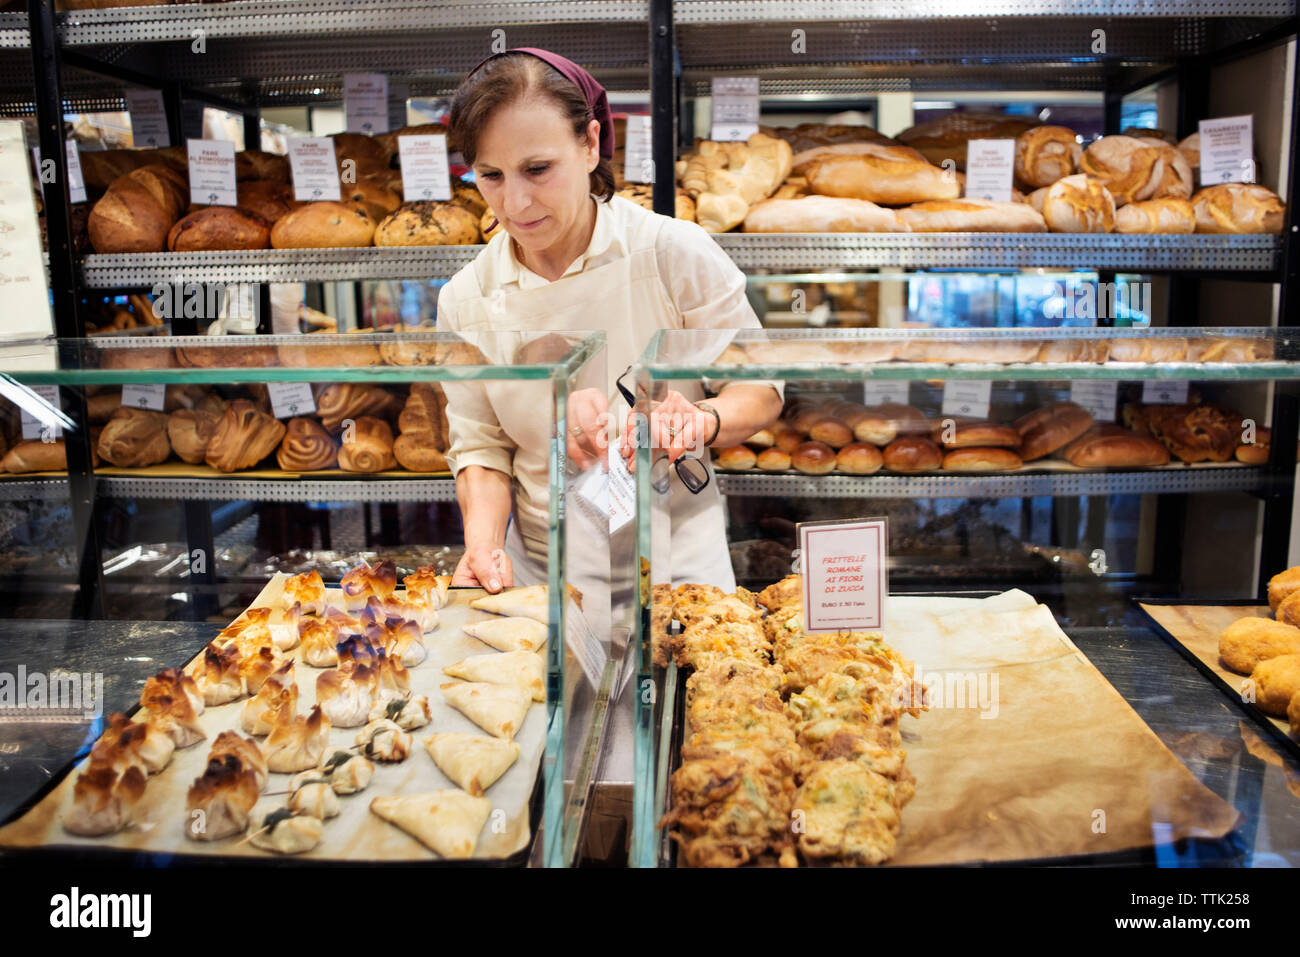 Chef arranging baked food in display cabinet at bakery shop Stock Photo